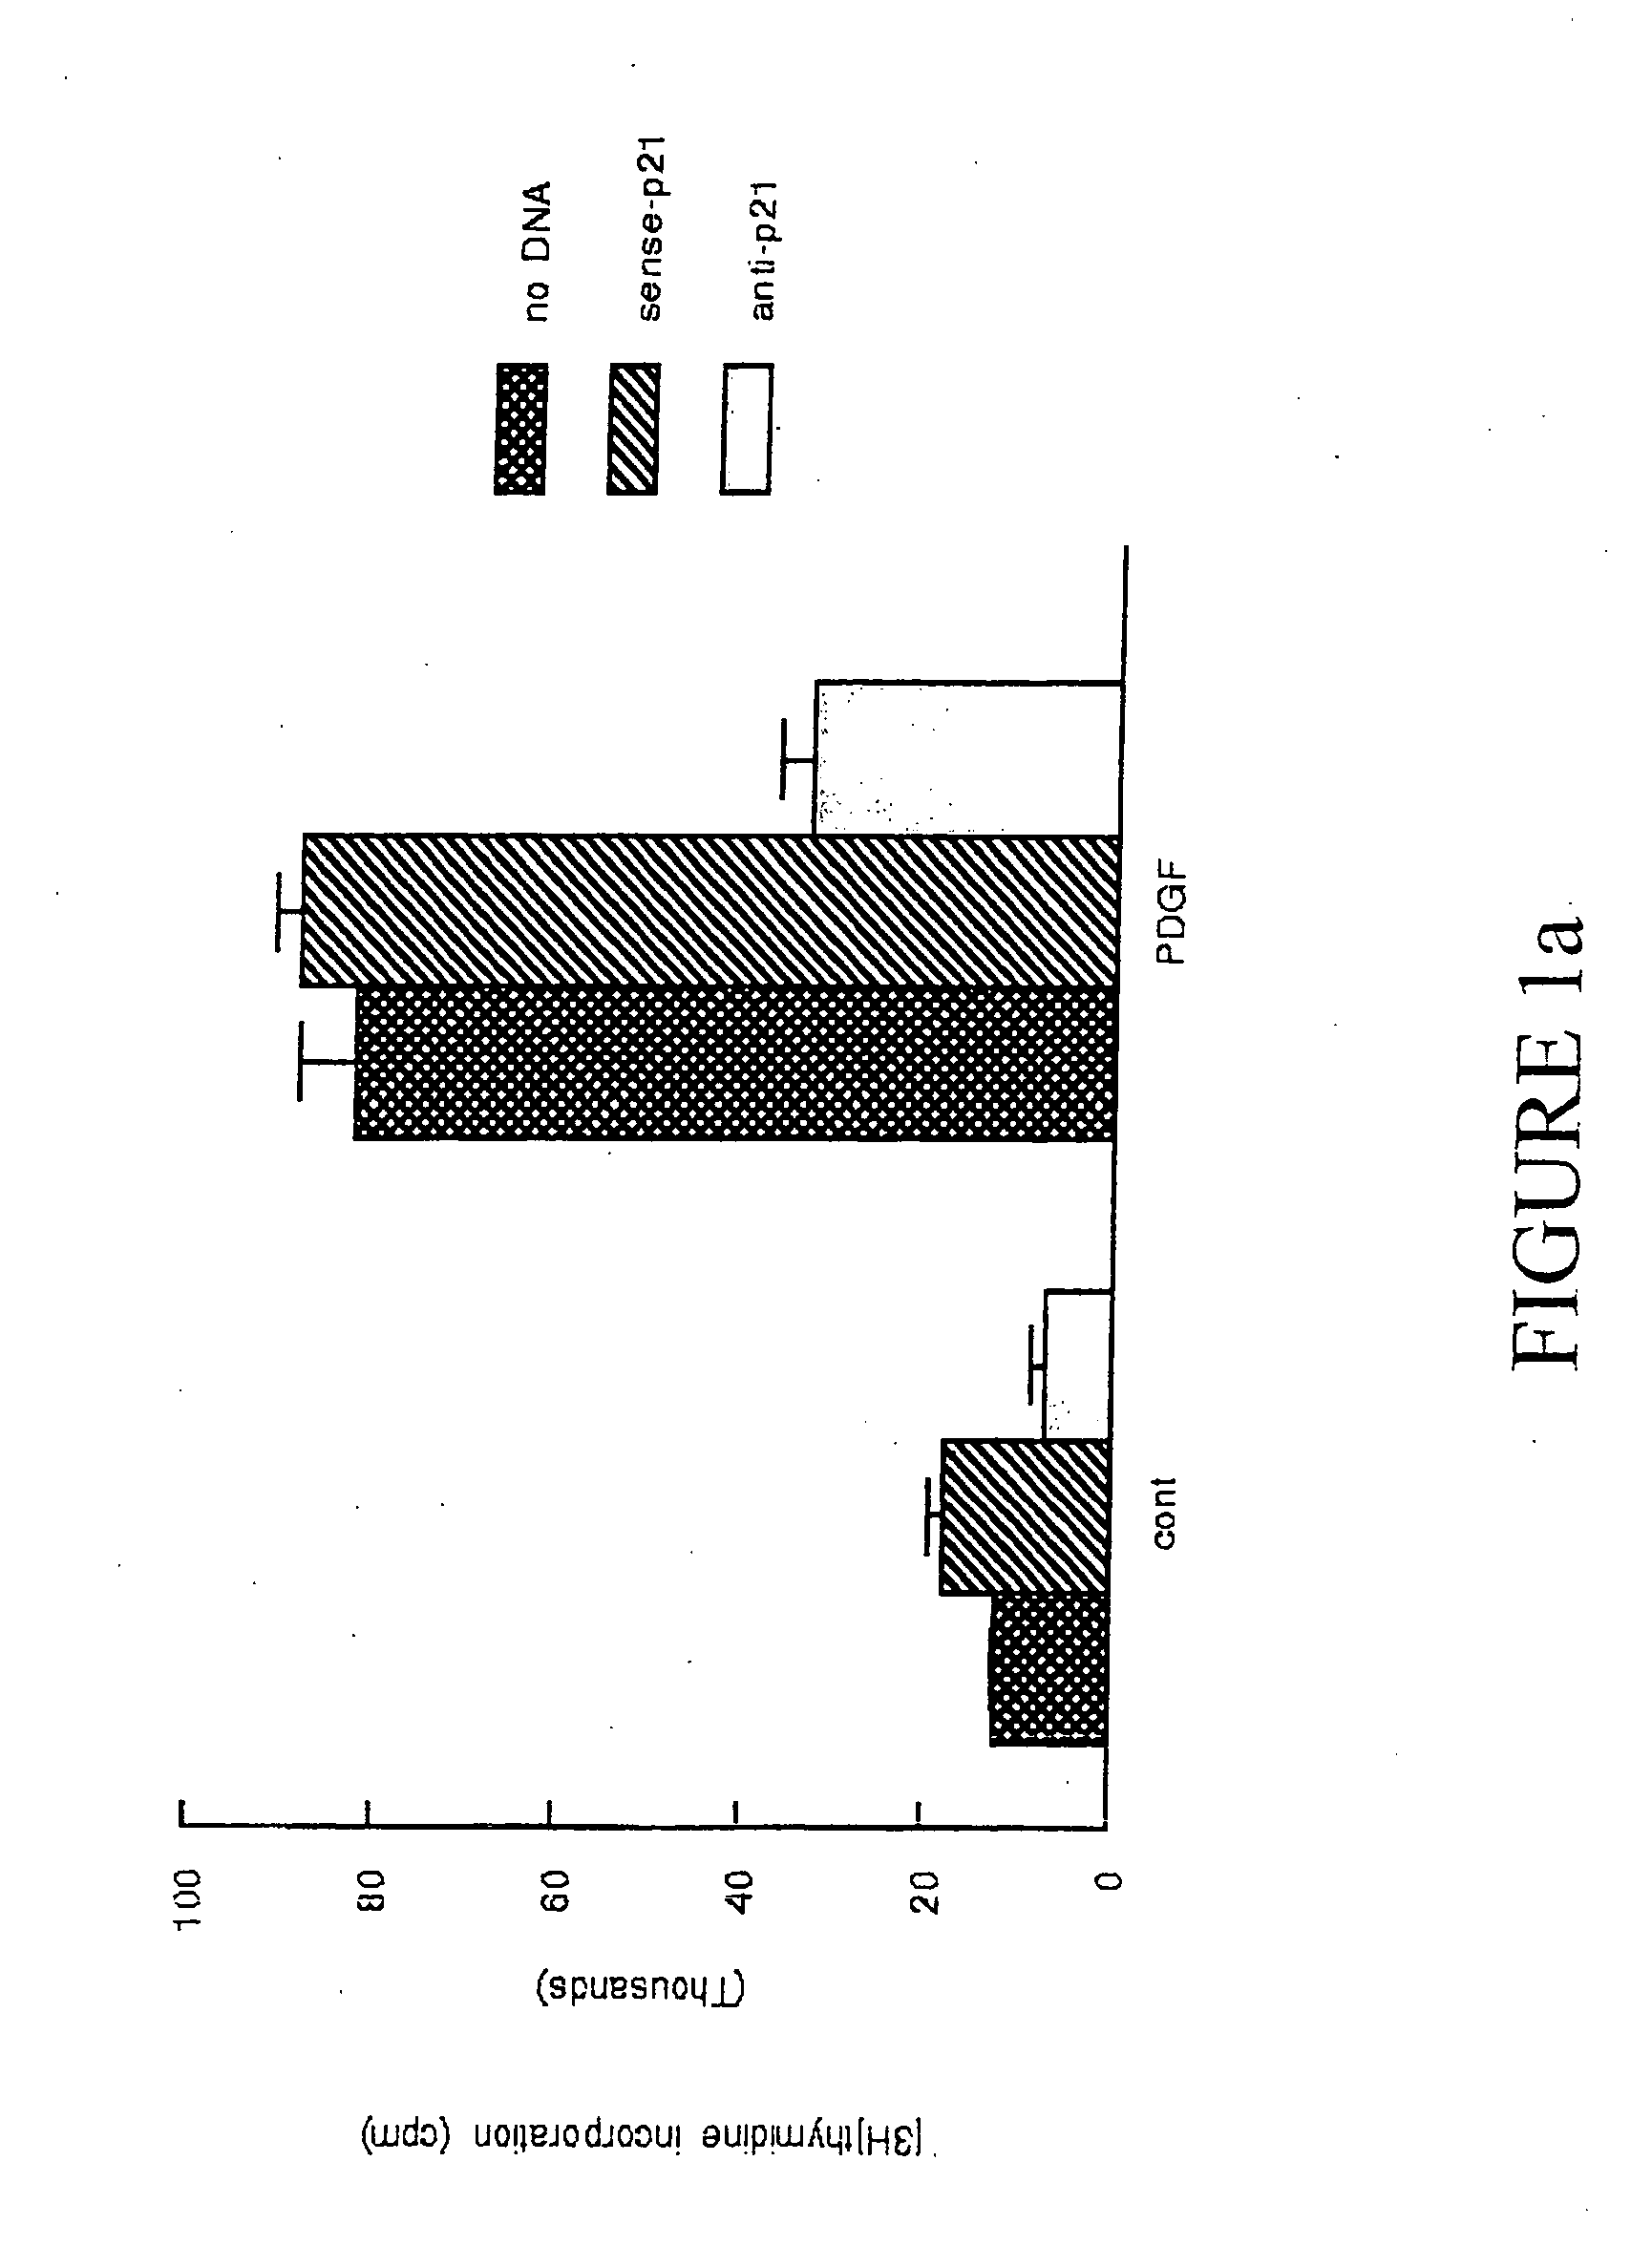 Novel specific inhibitor of the cyclin kinase inhibitor p21Waf1/Cip1 and methods of using the inhibitor